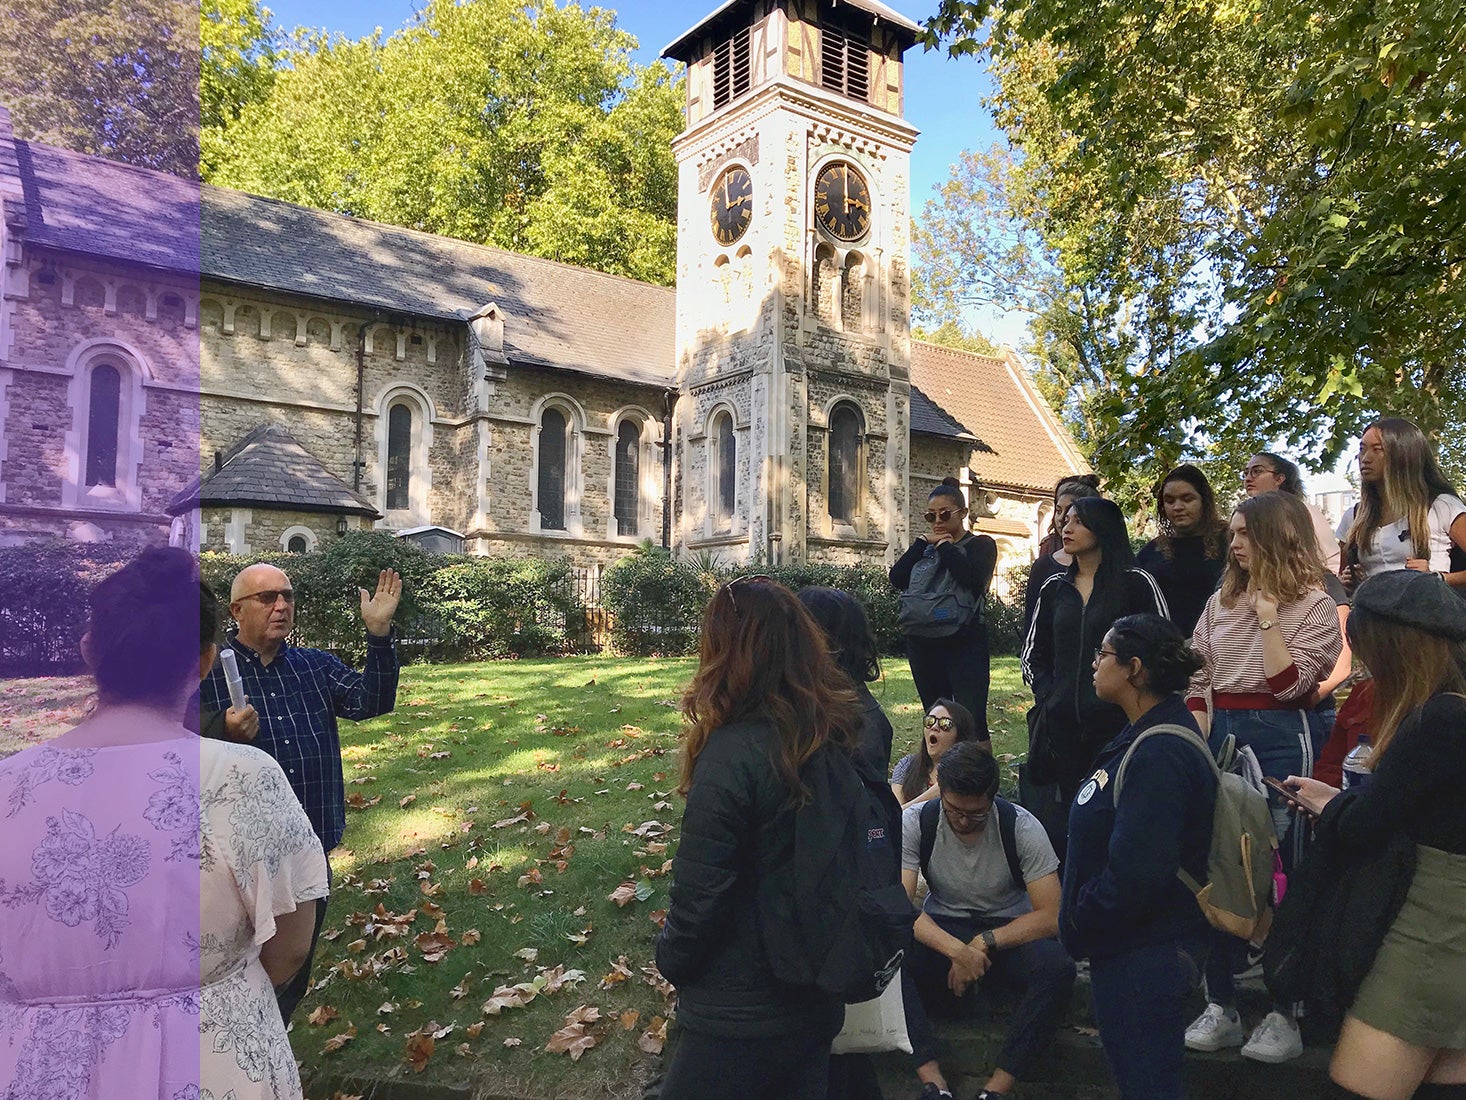  A group of students in England learn about the historic location they’re visiting.